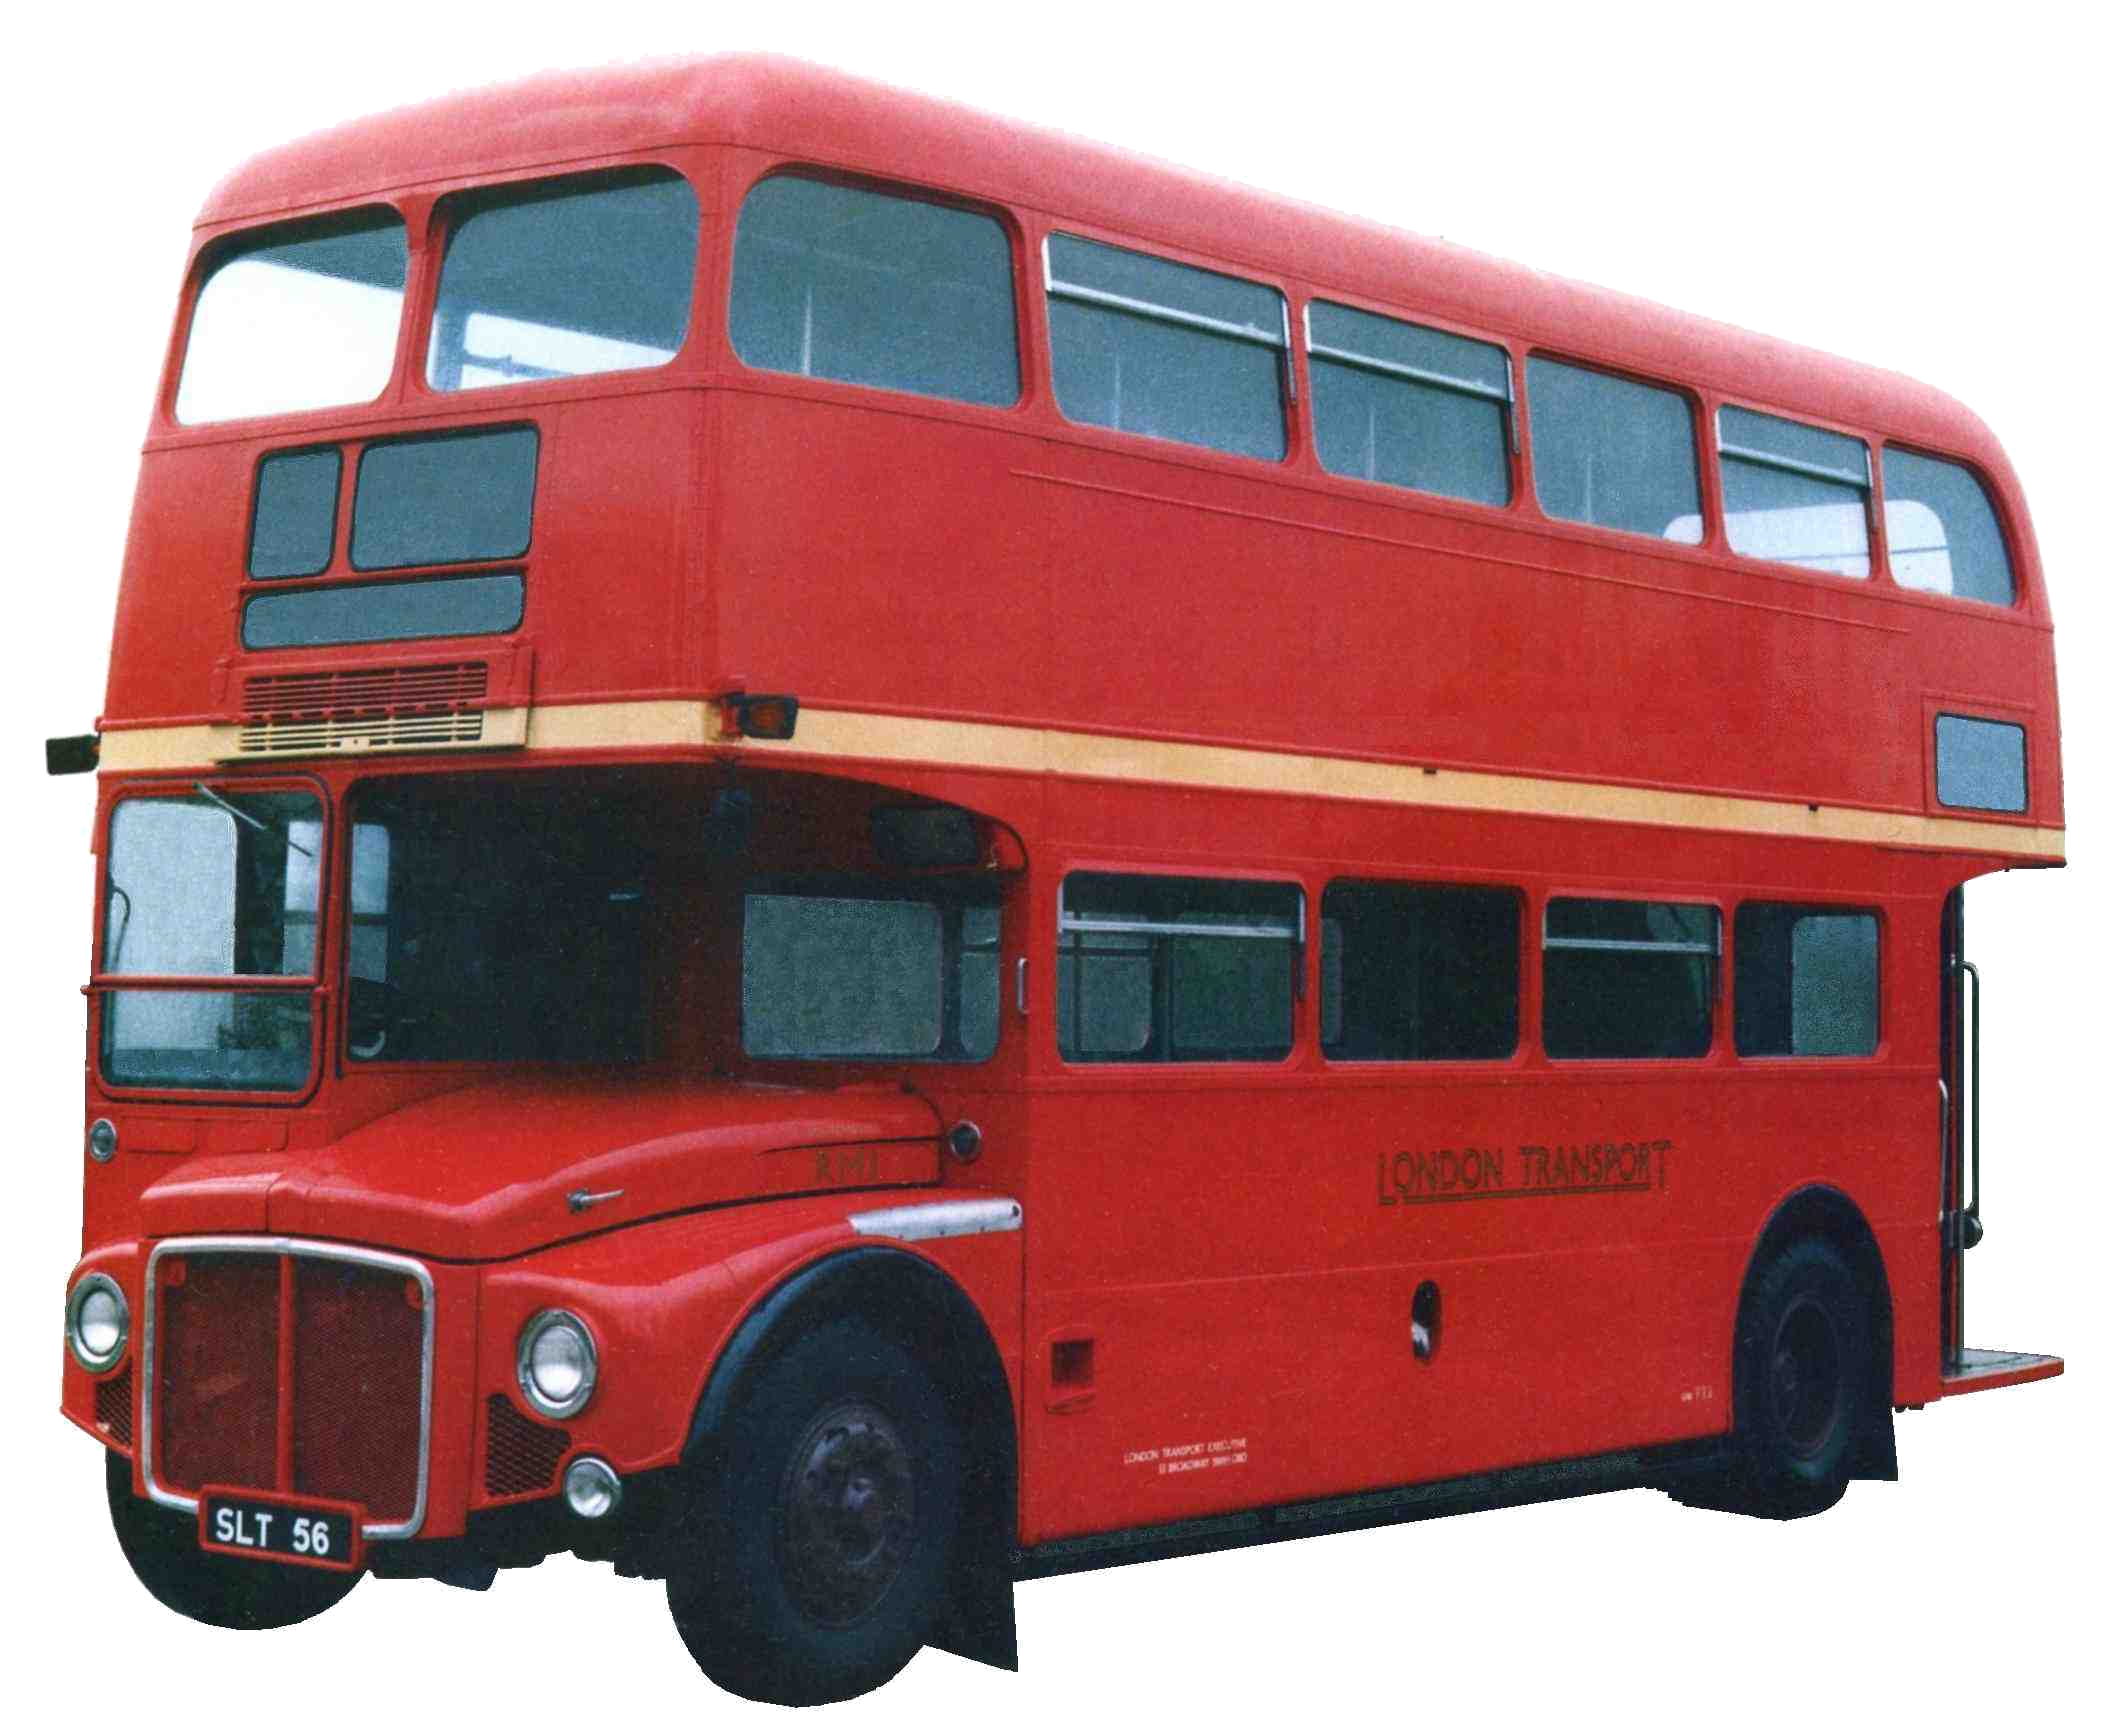 Red Bus